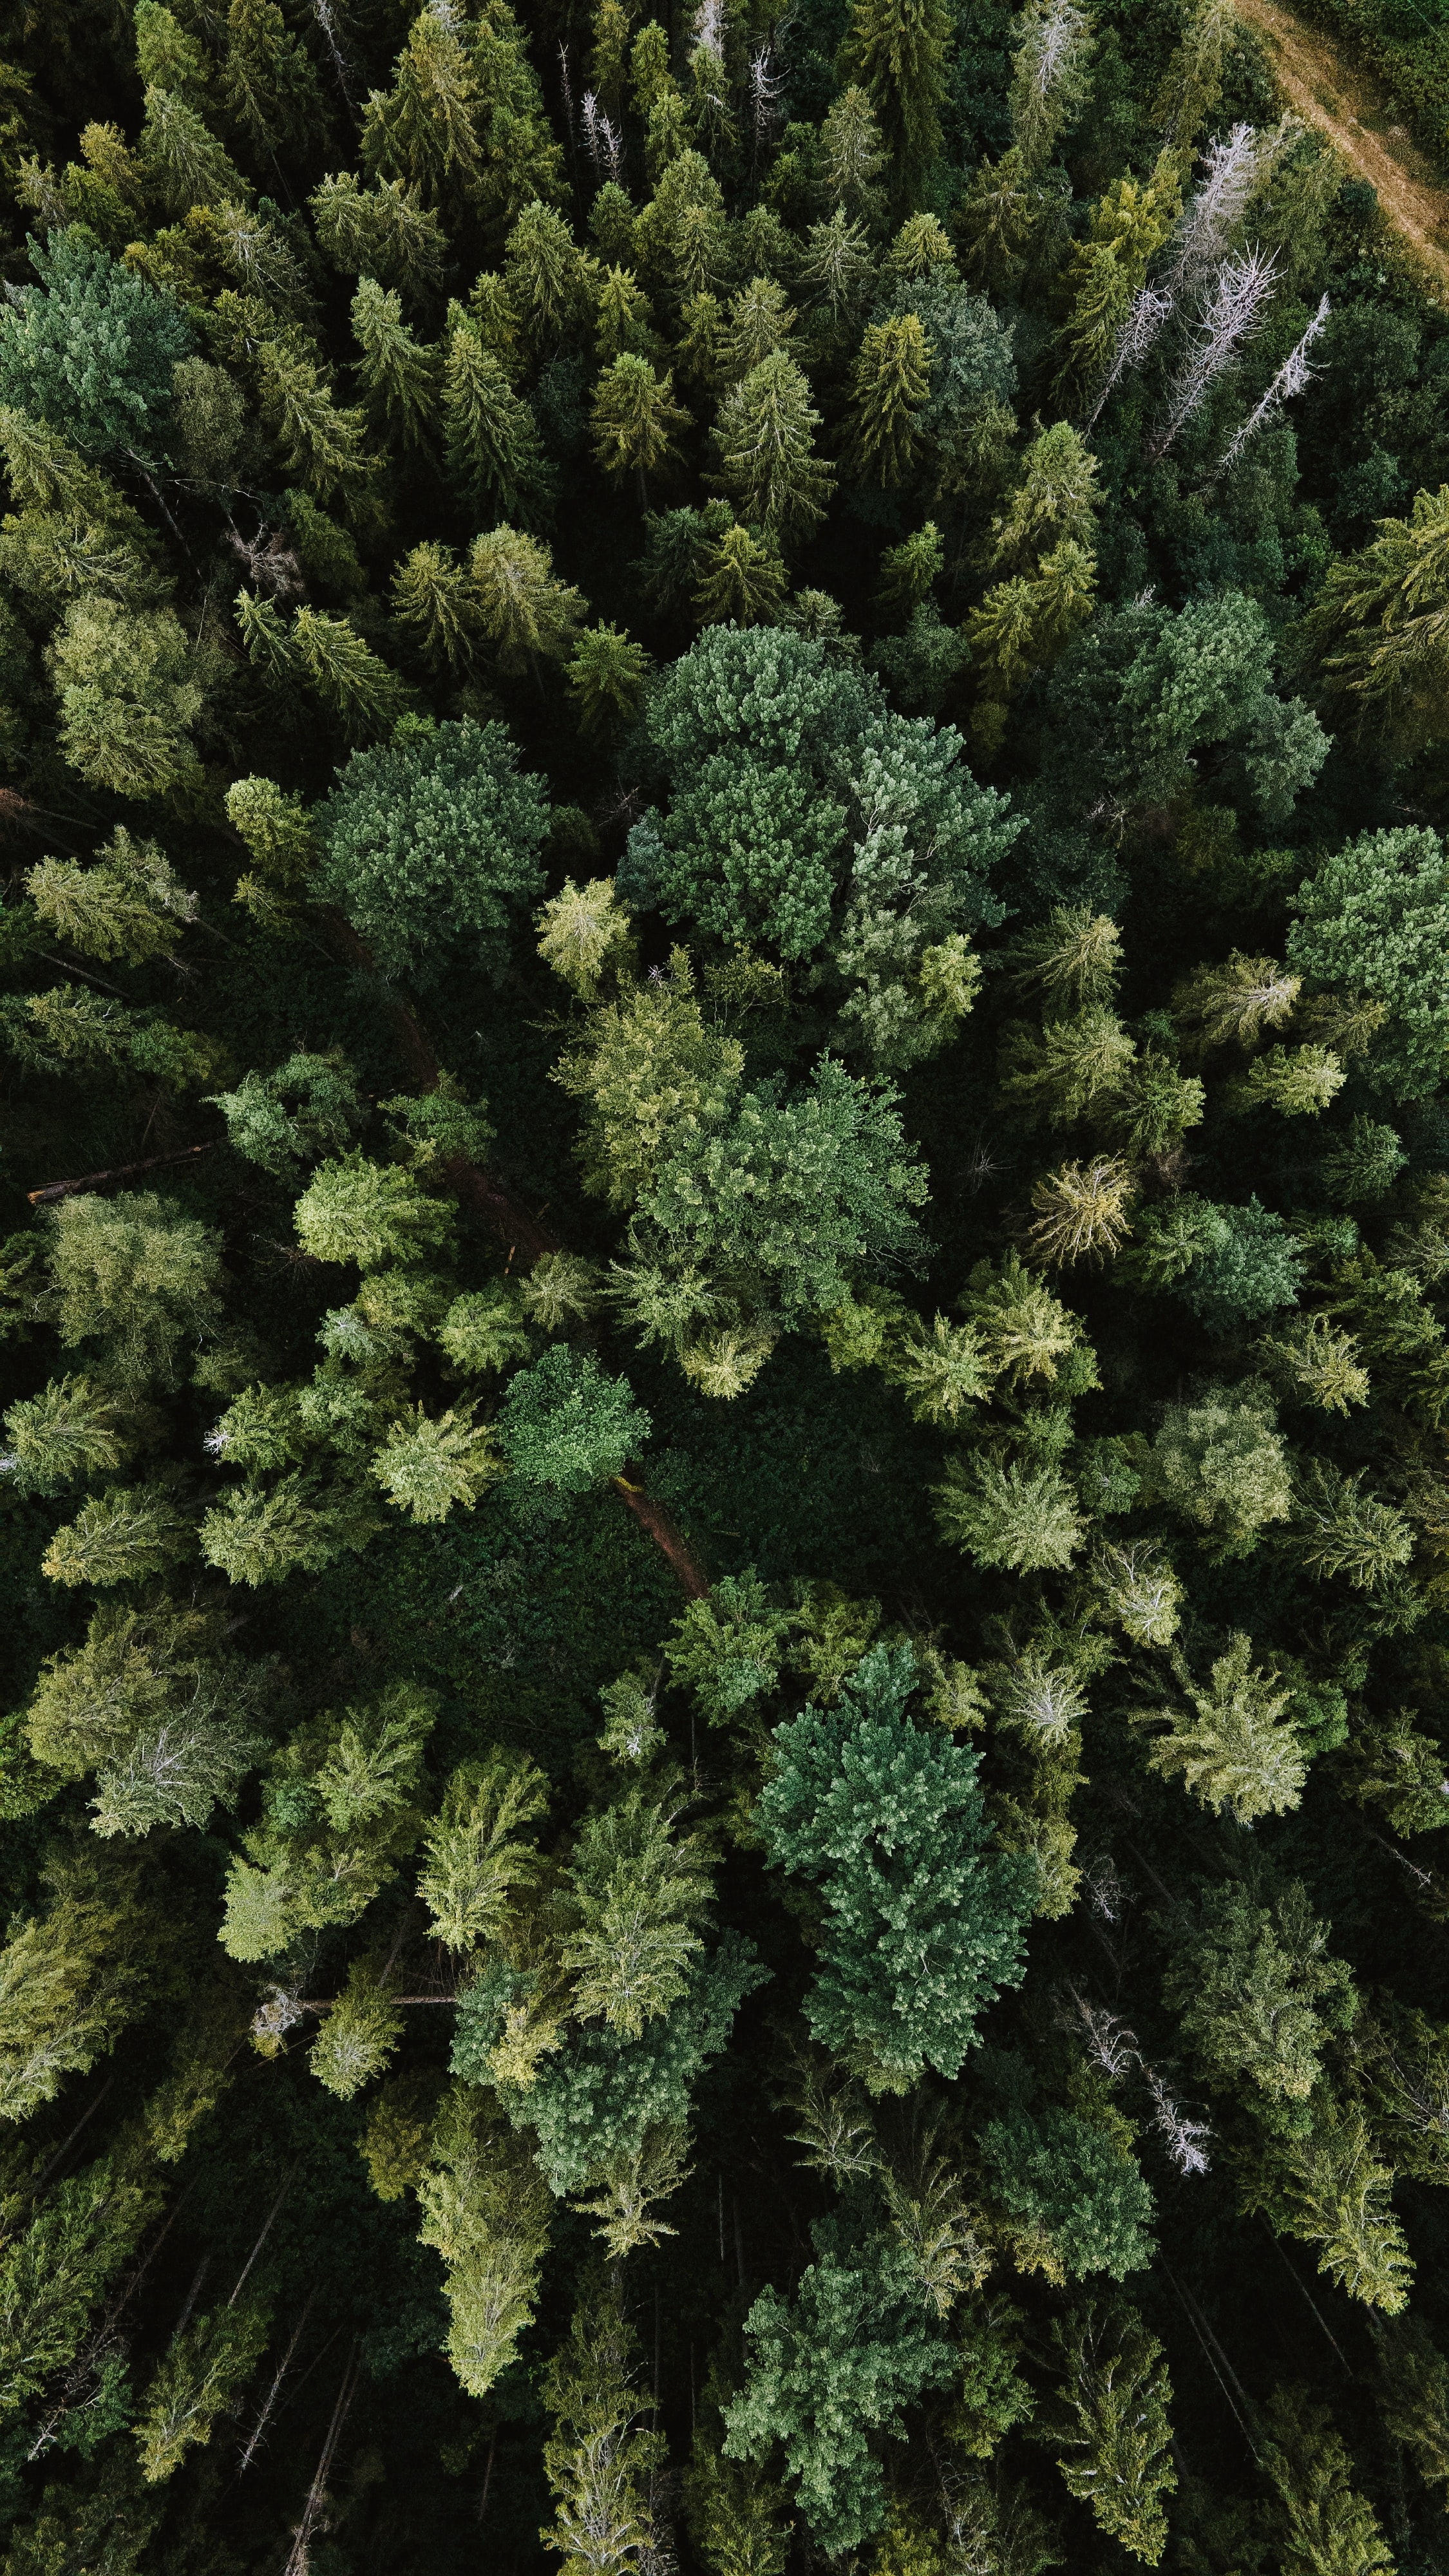 A top down image of a forest.